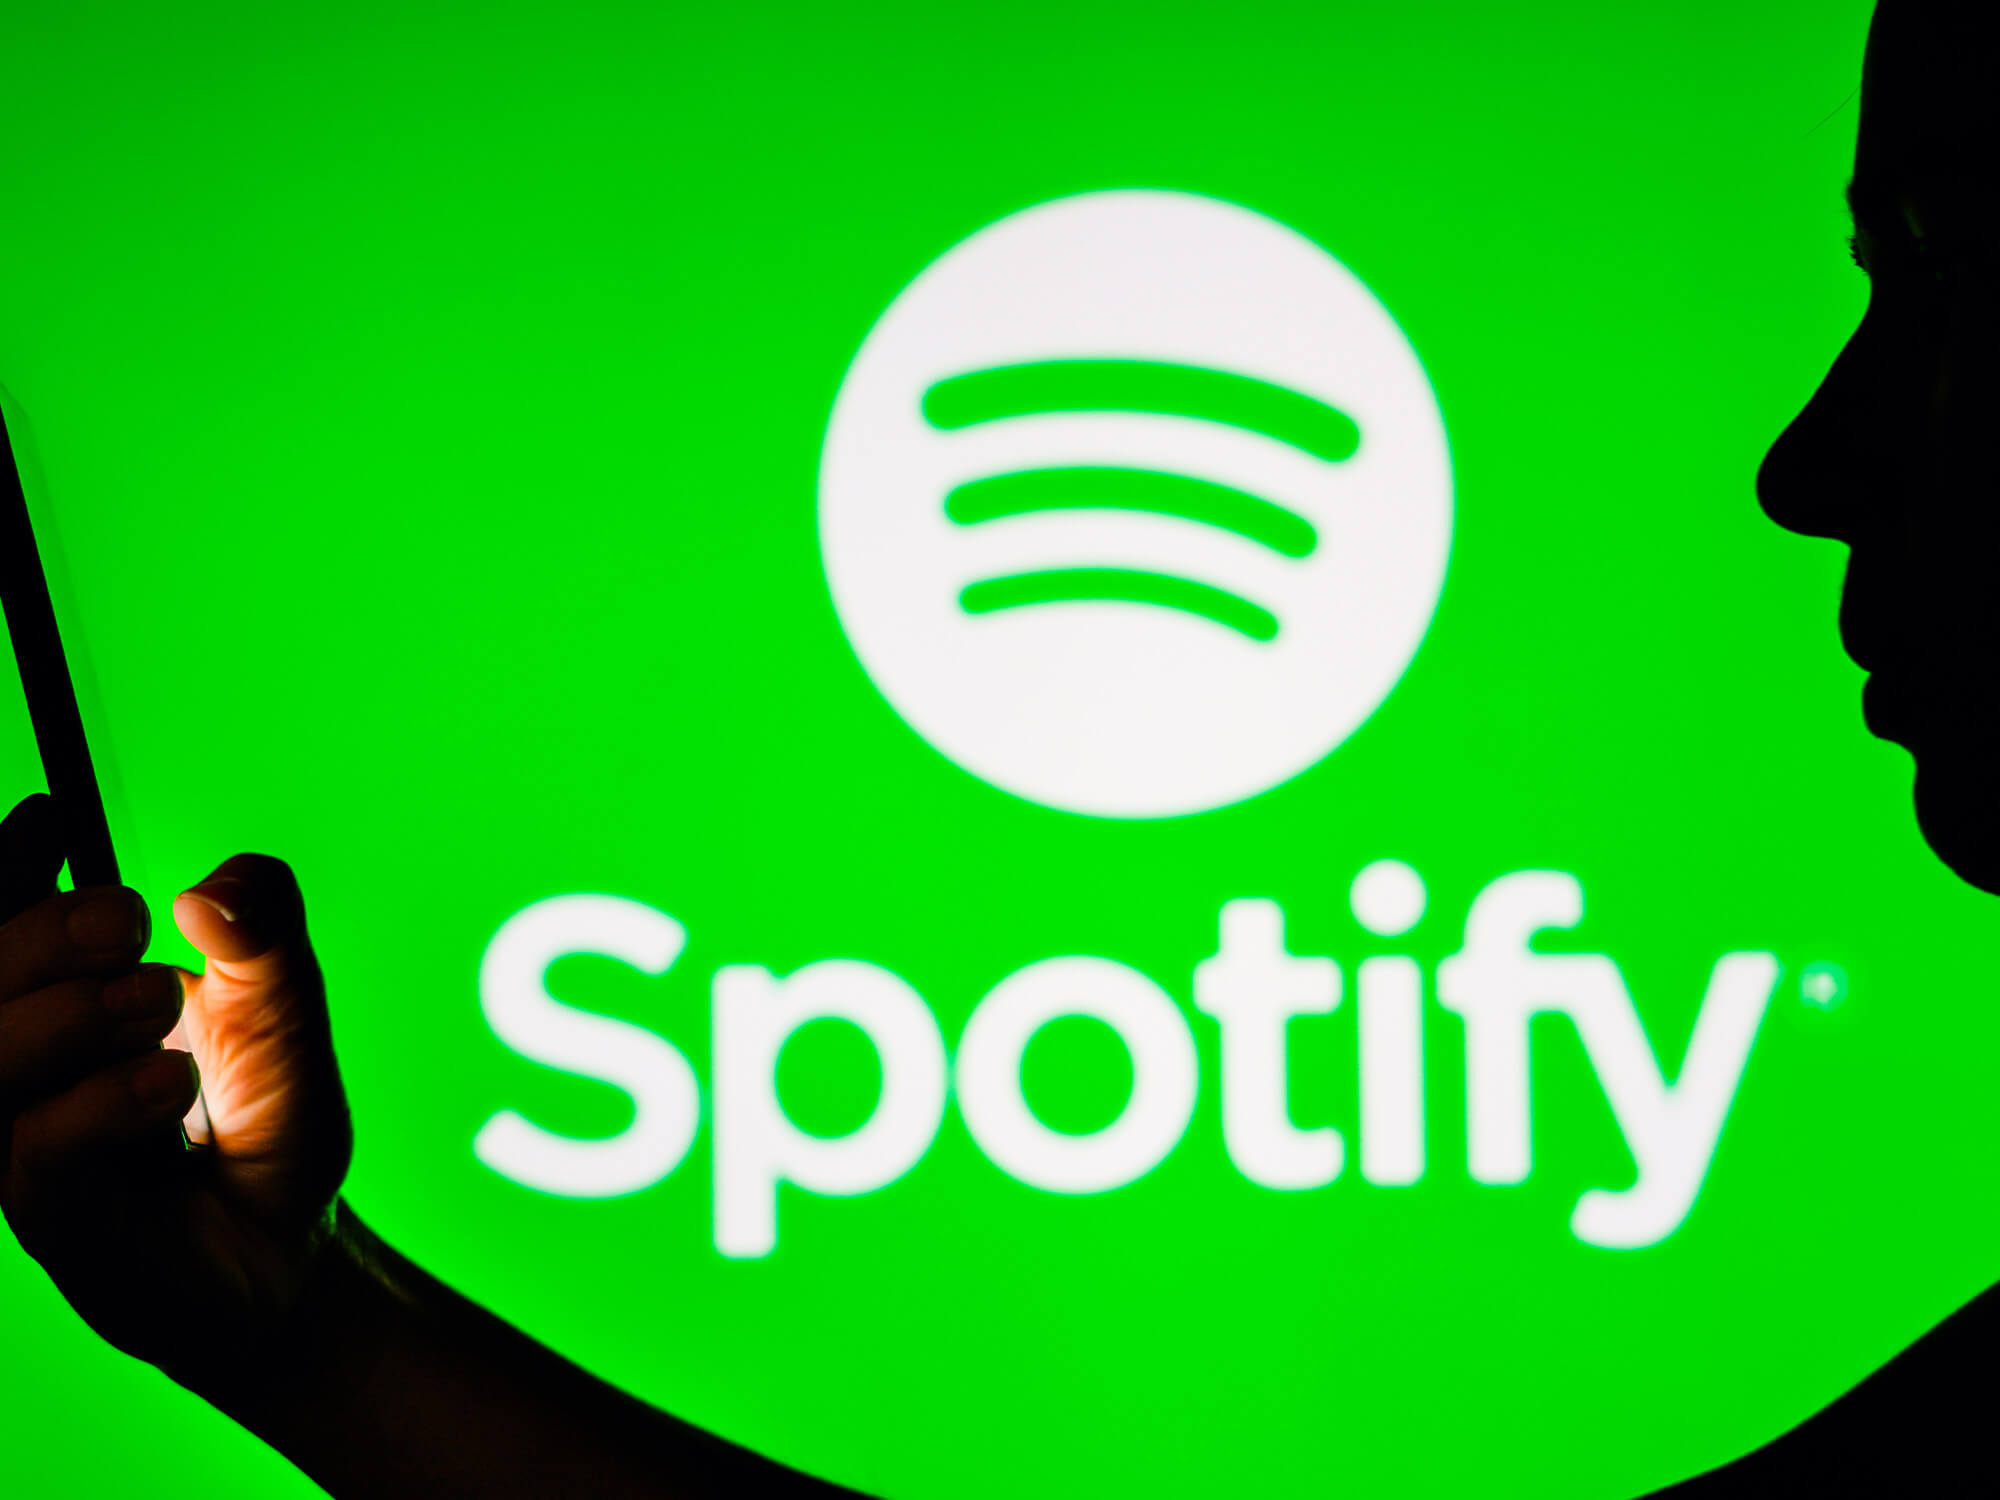 Spotify logo on green background, with silhouette of a woman holding a phone standing in front of it